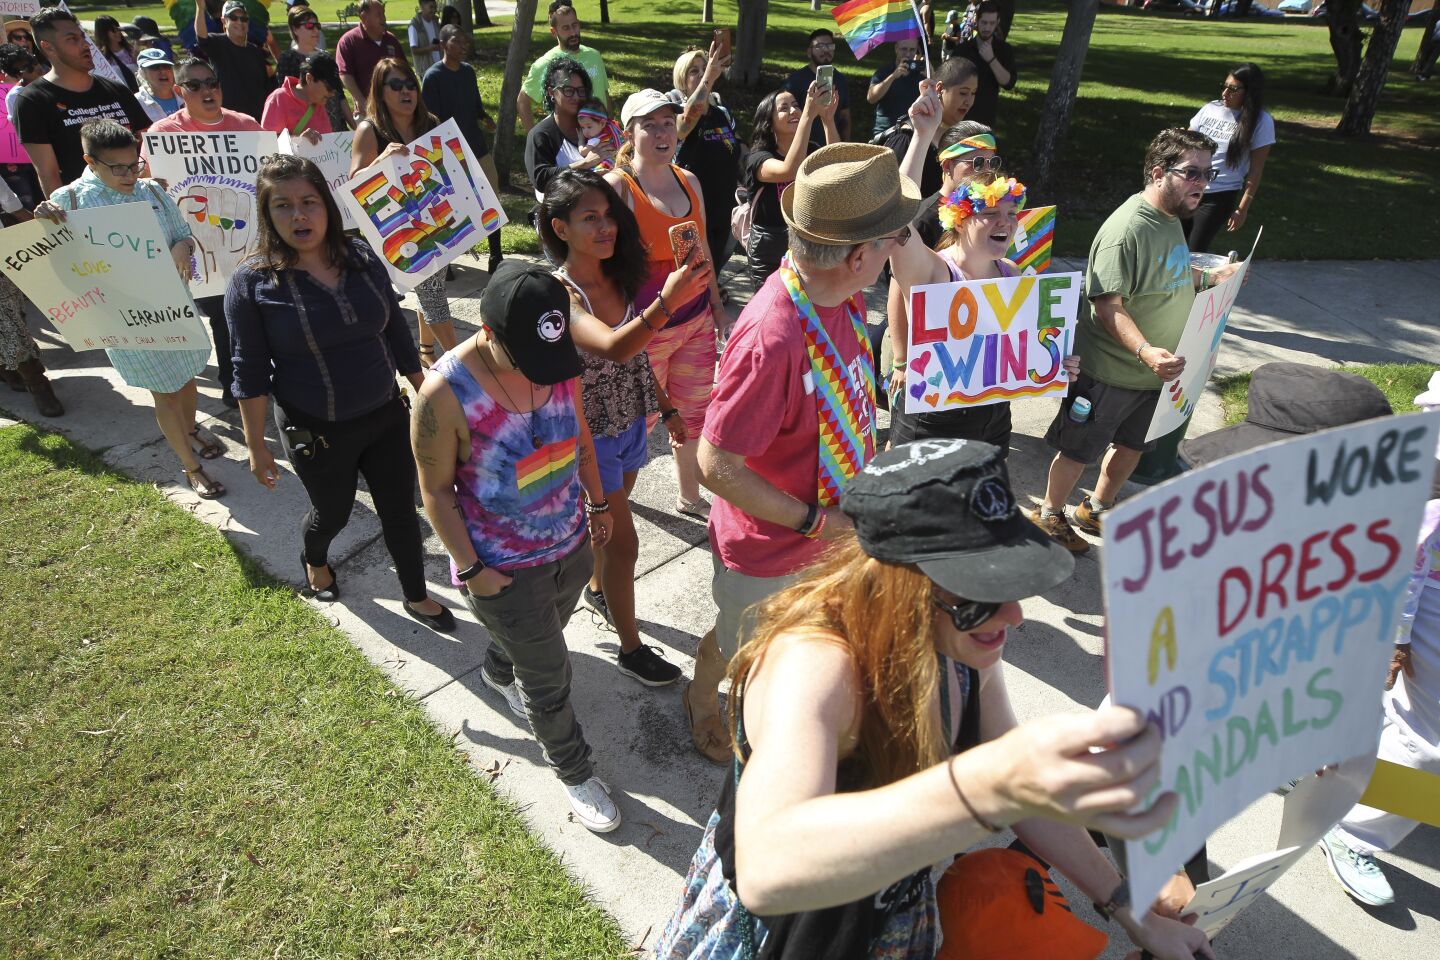 Protesters in support of the Drag Queen Story Hour march toward the Chula Vista Public Library, Civic Center Branch, to counter a group of protesters against the Story Hour on Tuesday, September 10, 2019 in Chula Vista, California.